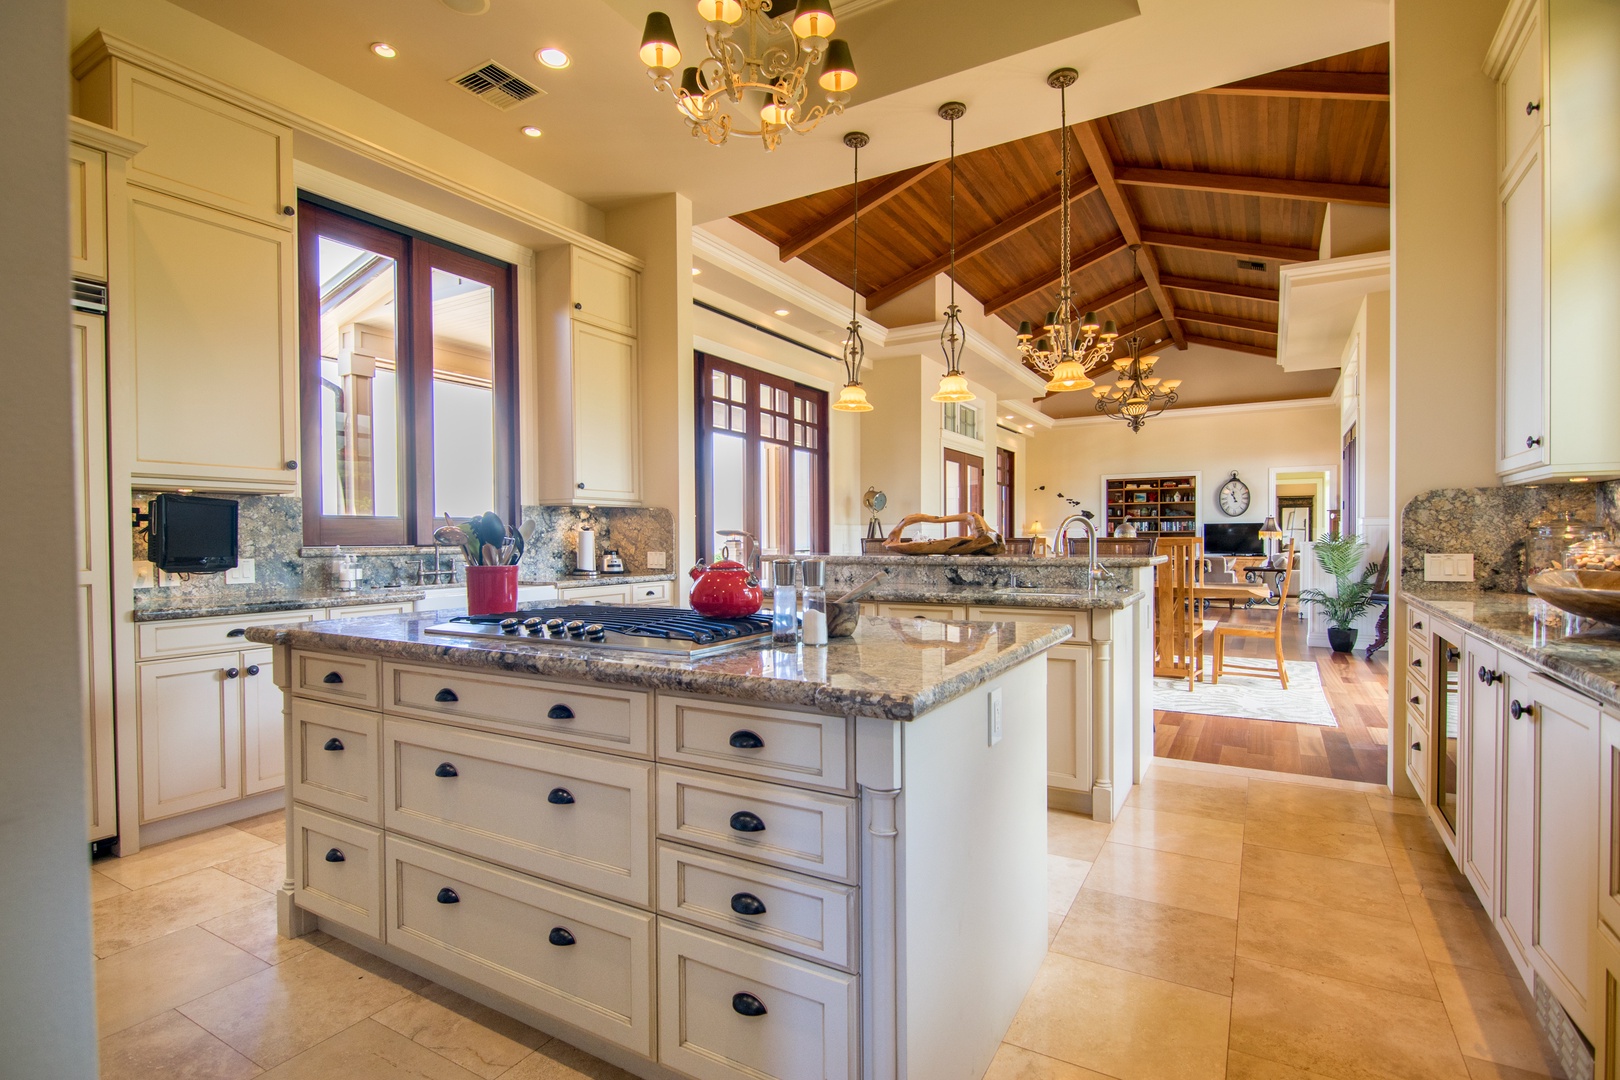 Lahaina Vacation Rentals, Rainbow Hale Estate* - View of Kitchen with High End Appliances, Granite Counters, Custom Cabinertry, Kitchen and Island Bar